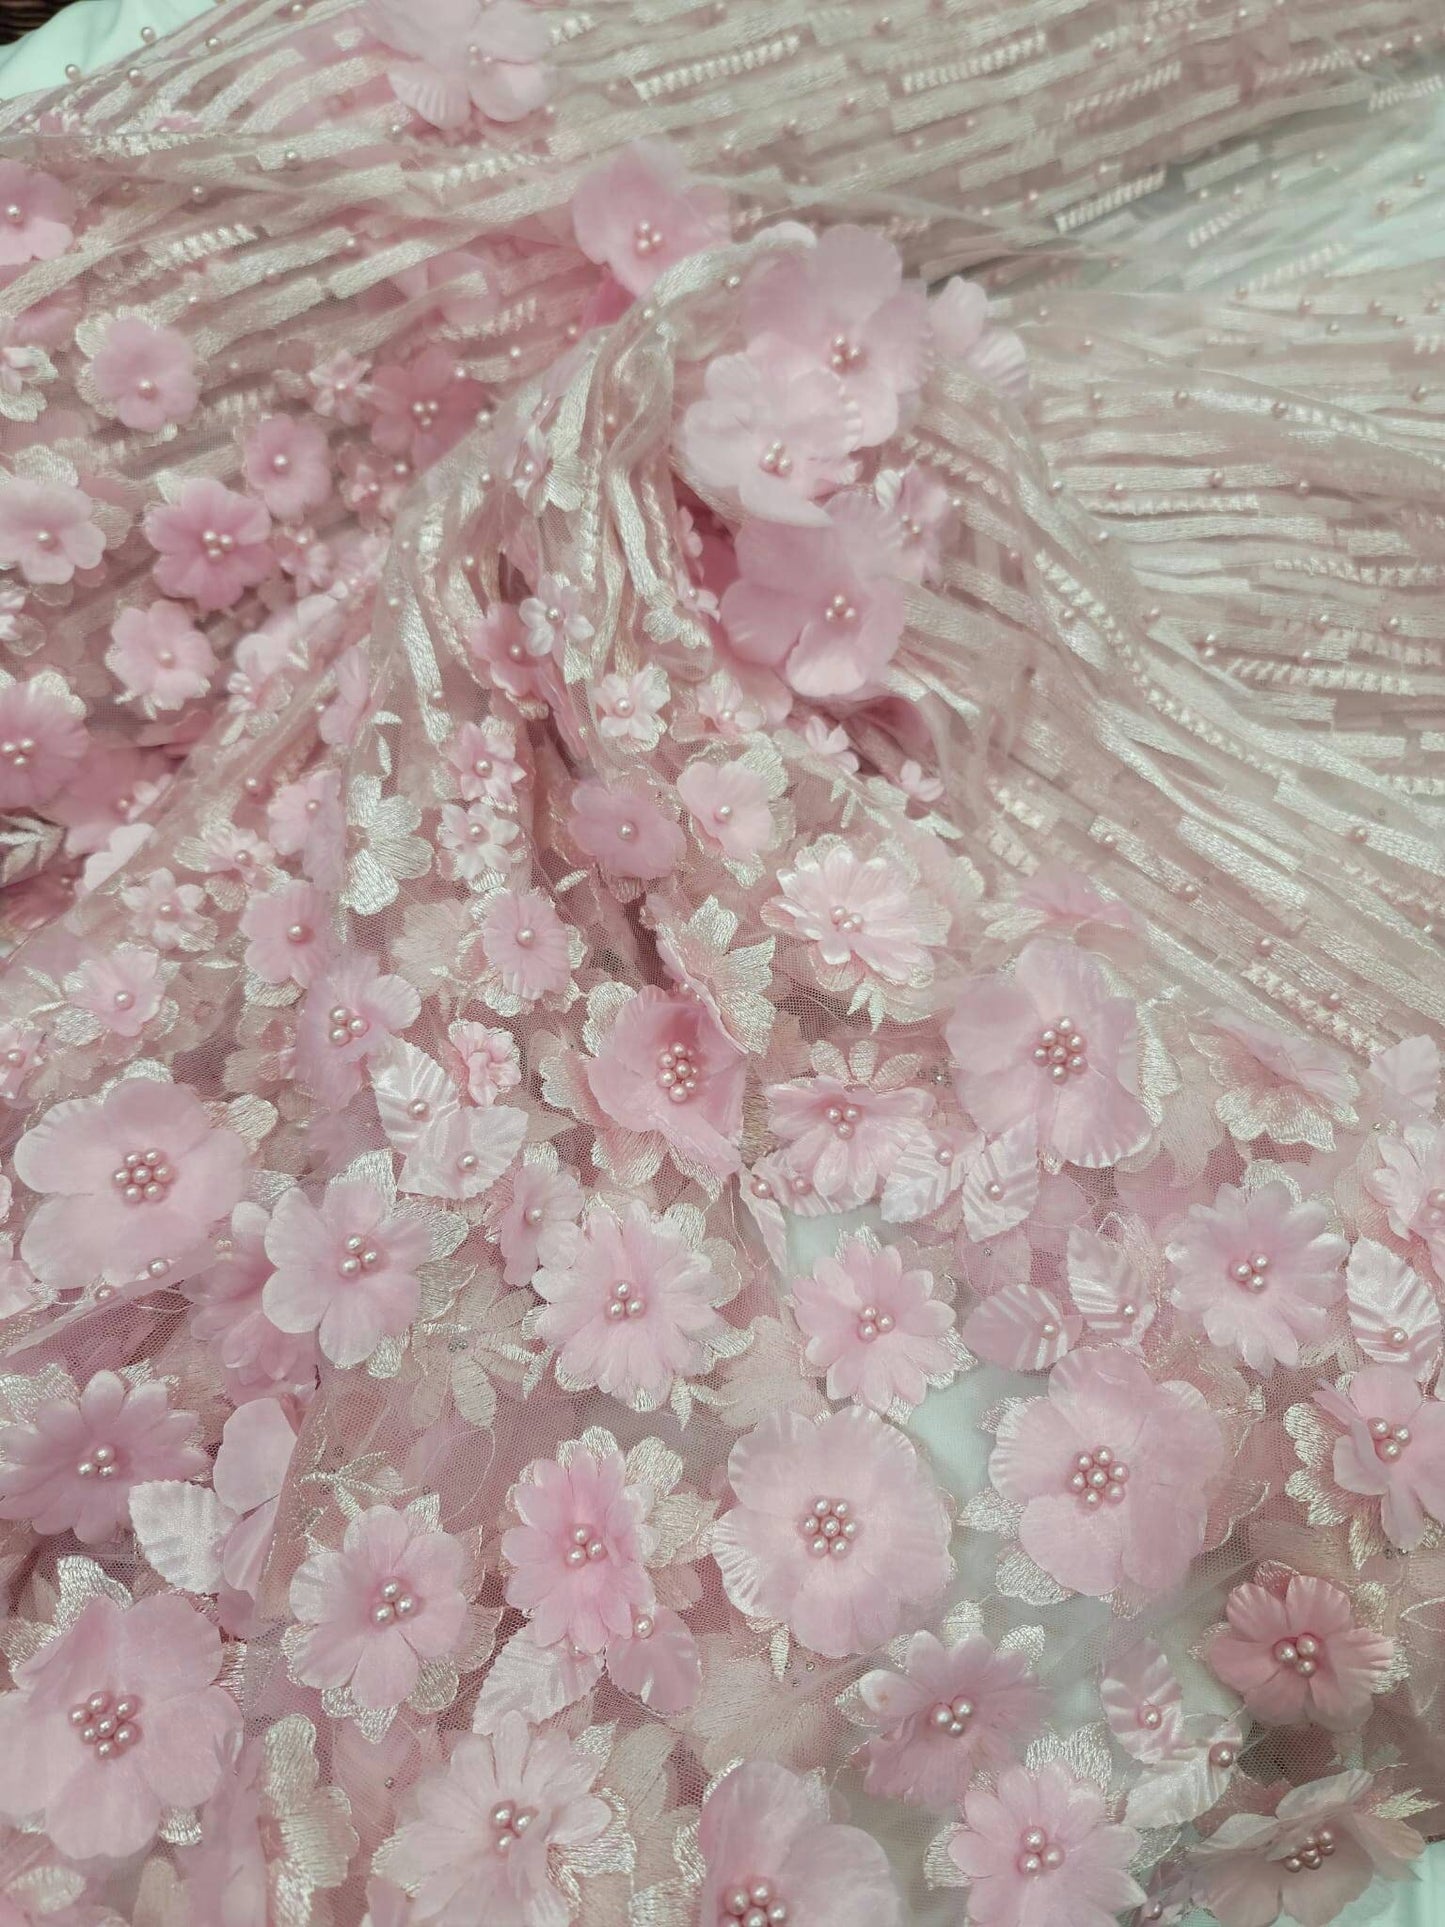 Pink Lace 3d Satin Floral Flowers On Embroidered Mesh Quinceañera Bridal Prom Gown Fabric Sold By The Yard Wedding Pearls